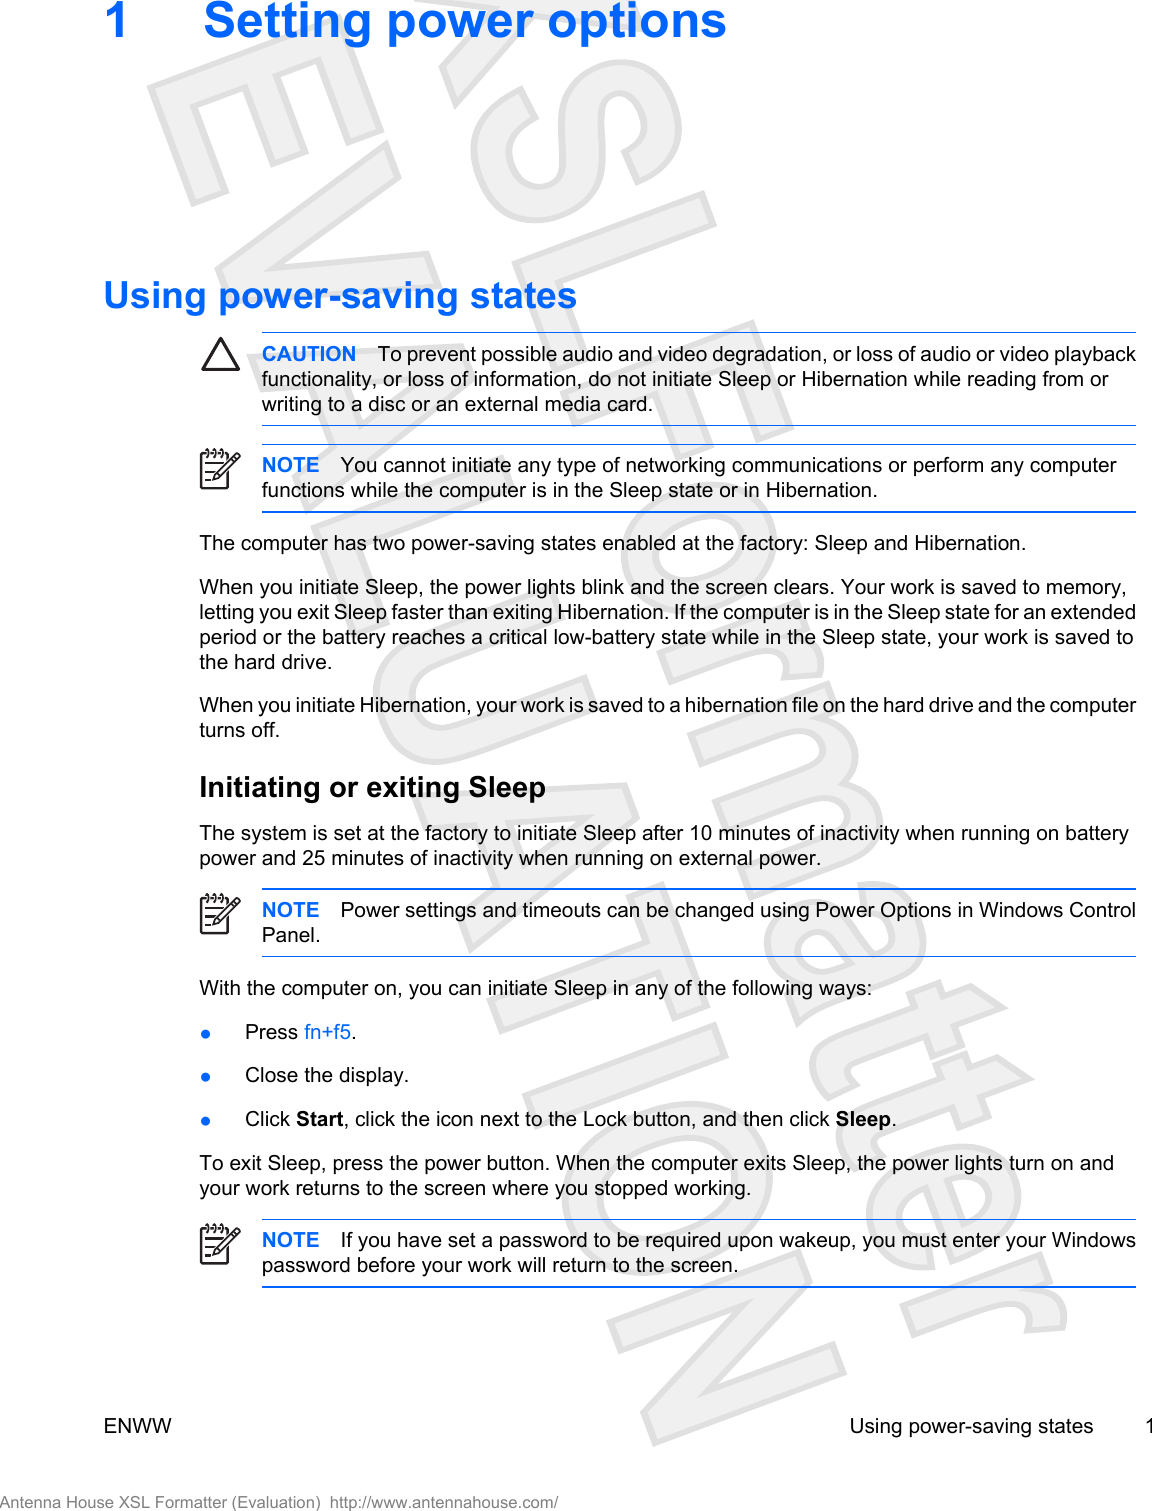 1 Setting power optionsUsing power-saving statesCAUTION To prevent possible audio and video degradation, or loss of audio or video playbackfunctionality, or loss of information, do not initiate Sleep or Hibernation while reading from orwriting to a disc or an external media card. NOTE You cannot initiate any type of networking communications or perform any computerfunctions while the computer is in the Sleep state or in Hibernation.The computer has two power-saving states enabled at the factory: Sleep and Hibernation.When you initiate Sleep, the power lights blink and the screen clears. Your work is saved to memory,letting you exit Sleep faster than exiting Hibernation. If the computer is in the Sleep state for an extendedperiod or the battery reaches a critical low-battery state while in the Sleep state, your work is saved tothe hard drive.When you initiate Hibernation, your work is saved to a hibernation file on the hard drive and the computerturns off.Initiating or exiting SleepThe system is set at the factory to initiate Sleep after 10 minutes of inactivity when running on batterypower and 25 minutes of inactivity when running on external power.NOTE Power settings and timeouts can be changed using Power Options in Windows ControlPanel.With the computer on, you can initiate Sleep in any of the following ways:●Press fn+f5.●Close the display.●Click Start, click the icon next to the Lock button, and then click Sleep.To exit Sleep, press the power button. When the computer exits Sleep, the power lights turn on andyour work returns to the screen where you stopped working.NOTE If you have set a password to be required upon wakeup, you must enter your Windowspassword before your work will return to the screen.ENWW Using power-saving states 1Antenna House XSL Formatter (Evaluation)  http://www.antennahouse.com/